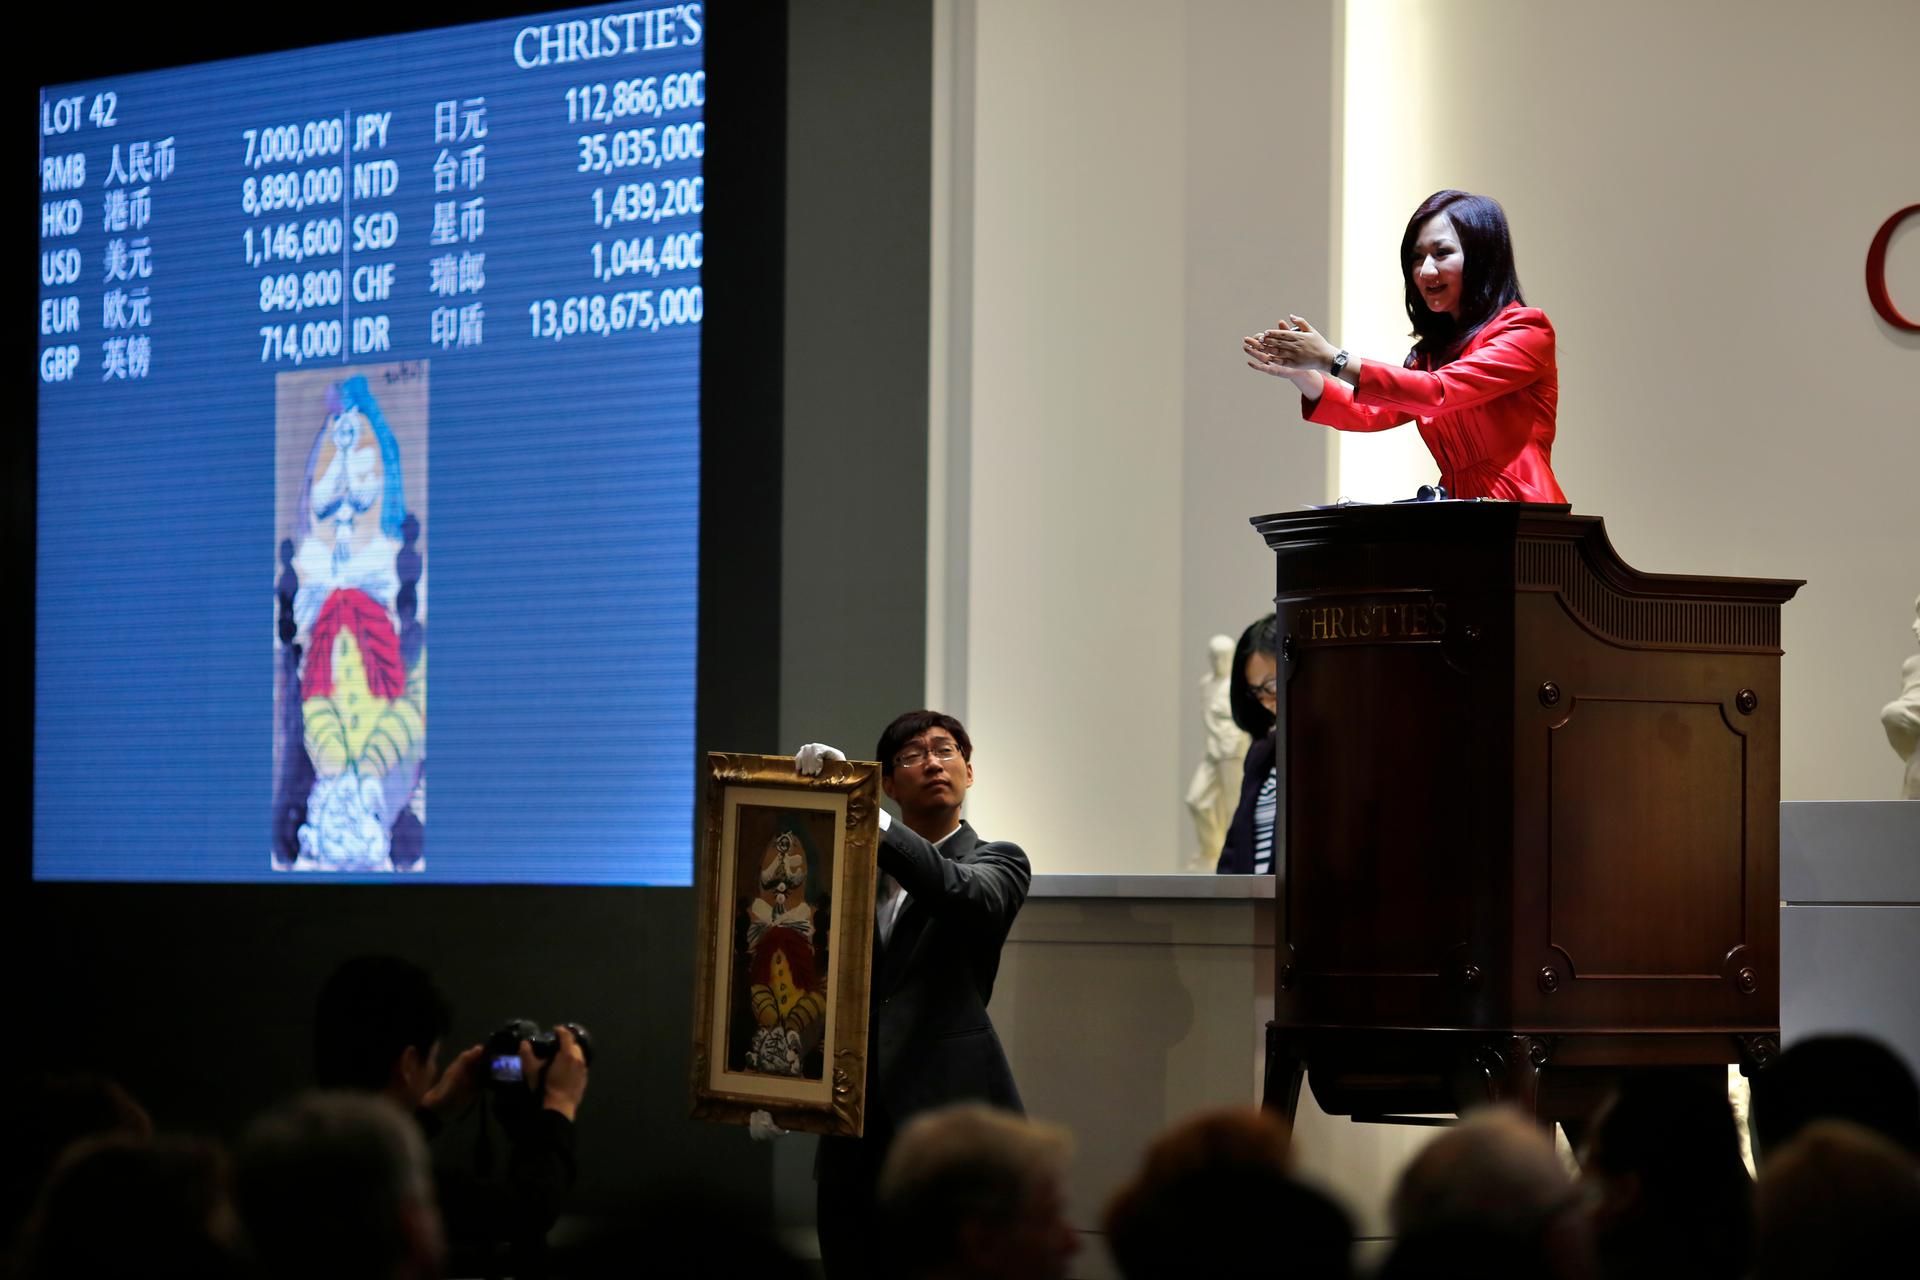 A Christie's moderator facilitates the sale of a piece of artwork titled "Homme Assis" by Pablo Picasso during a Christie's auction in Shanghai on September 26, 2013. 